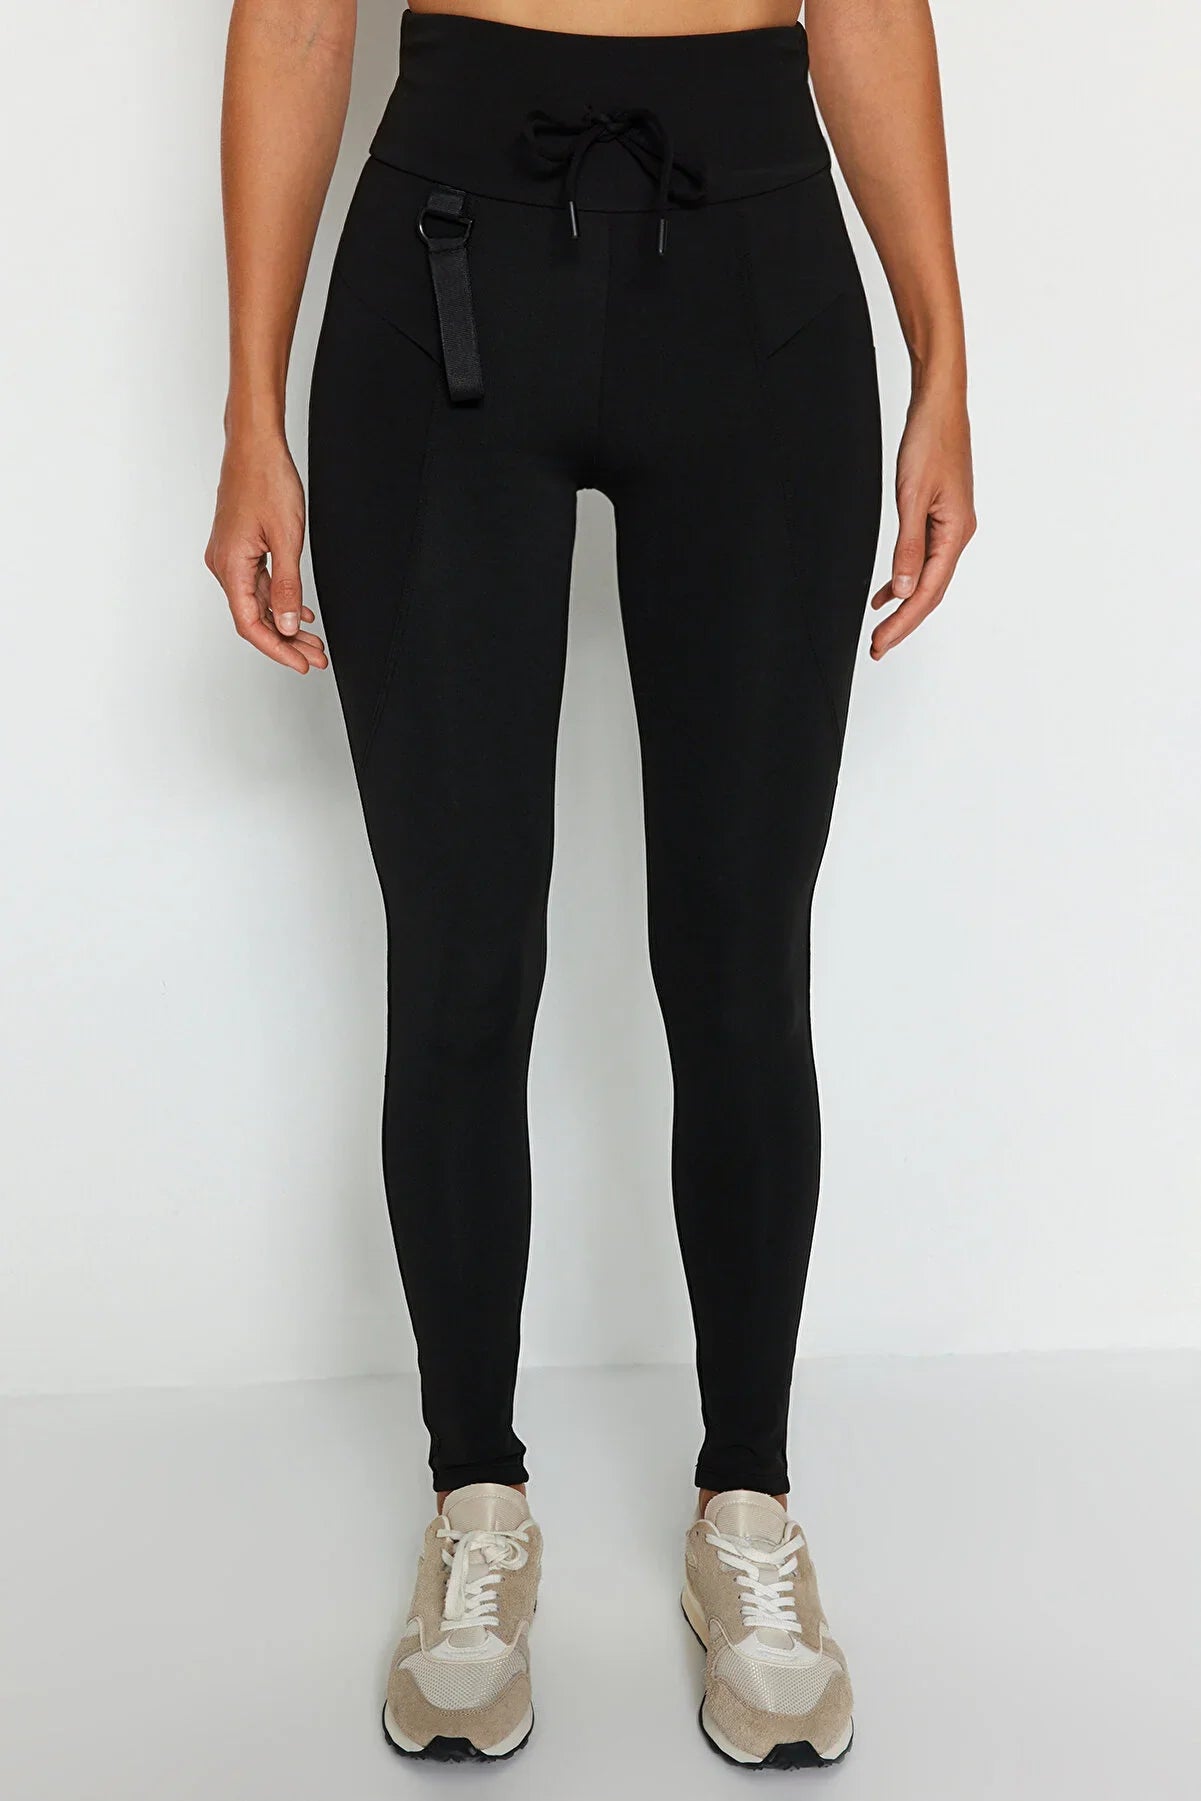 Trendyol Black Leggings with Attached Shapewear